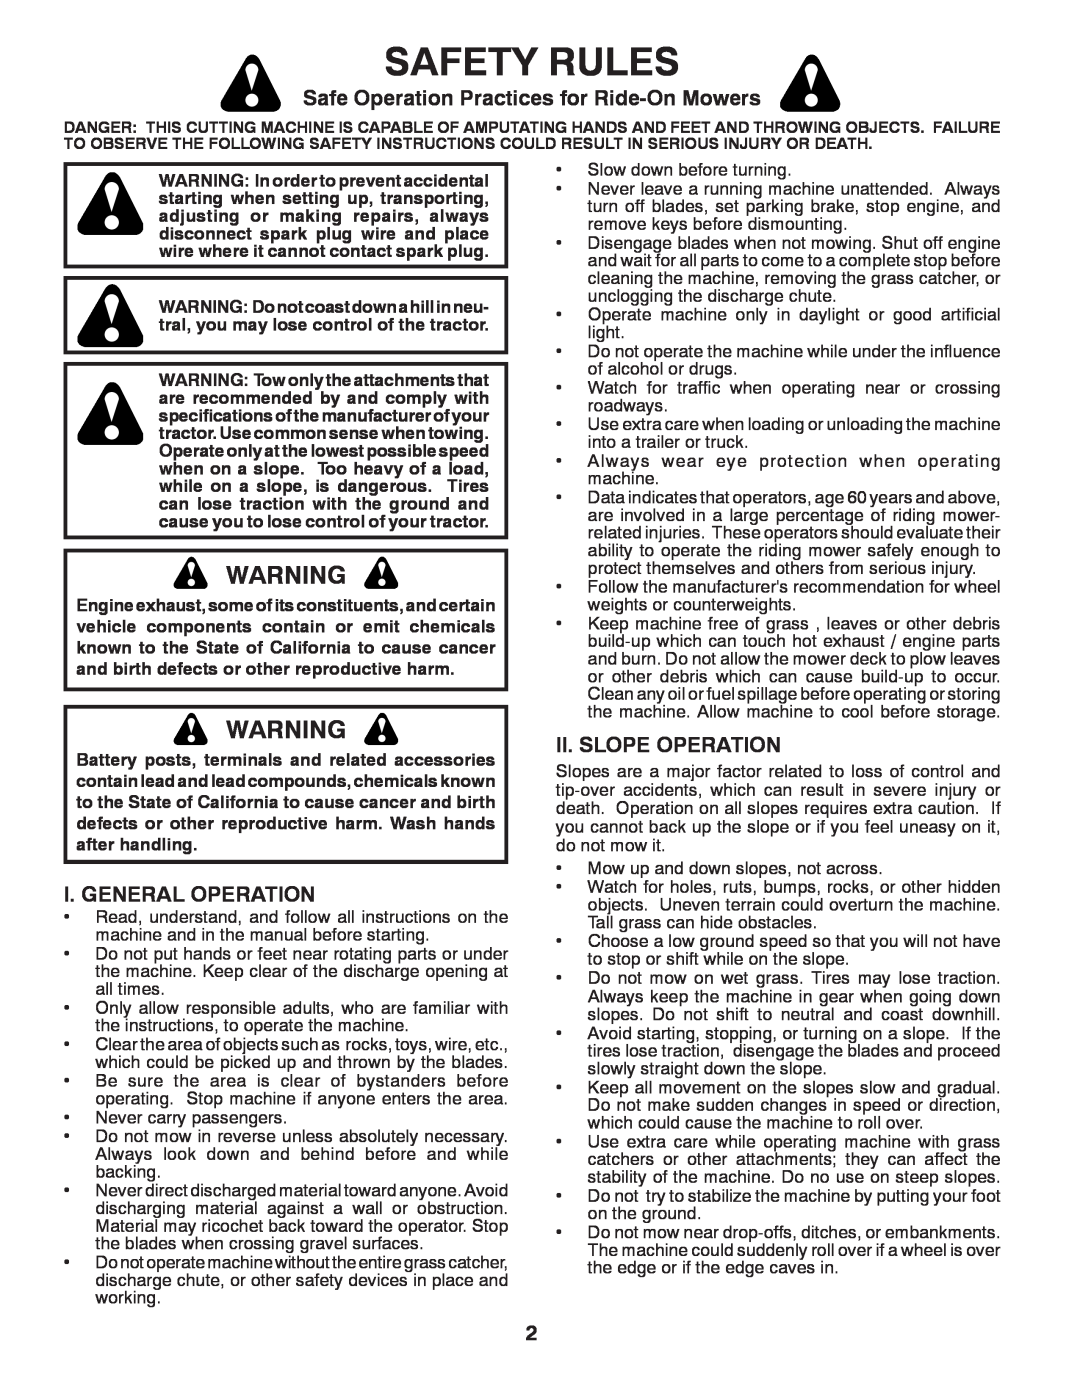 Dixon 433616, D22H46 Safety Rules, Safe Operation Practices for Ride-OnMowers, I. General Operation, Ii. Slope Operation 